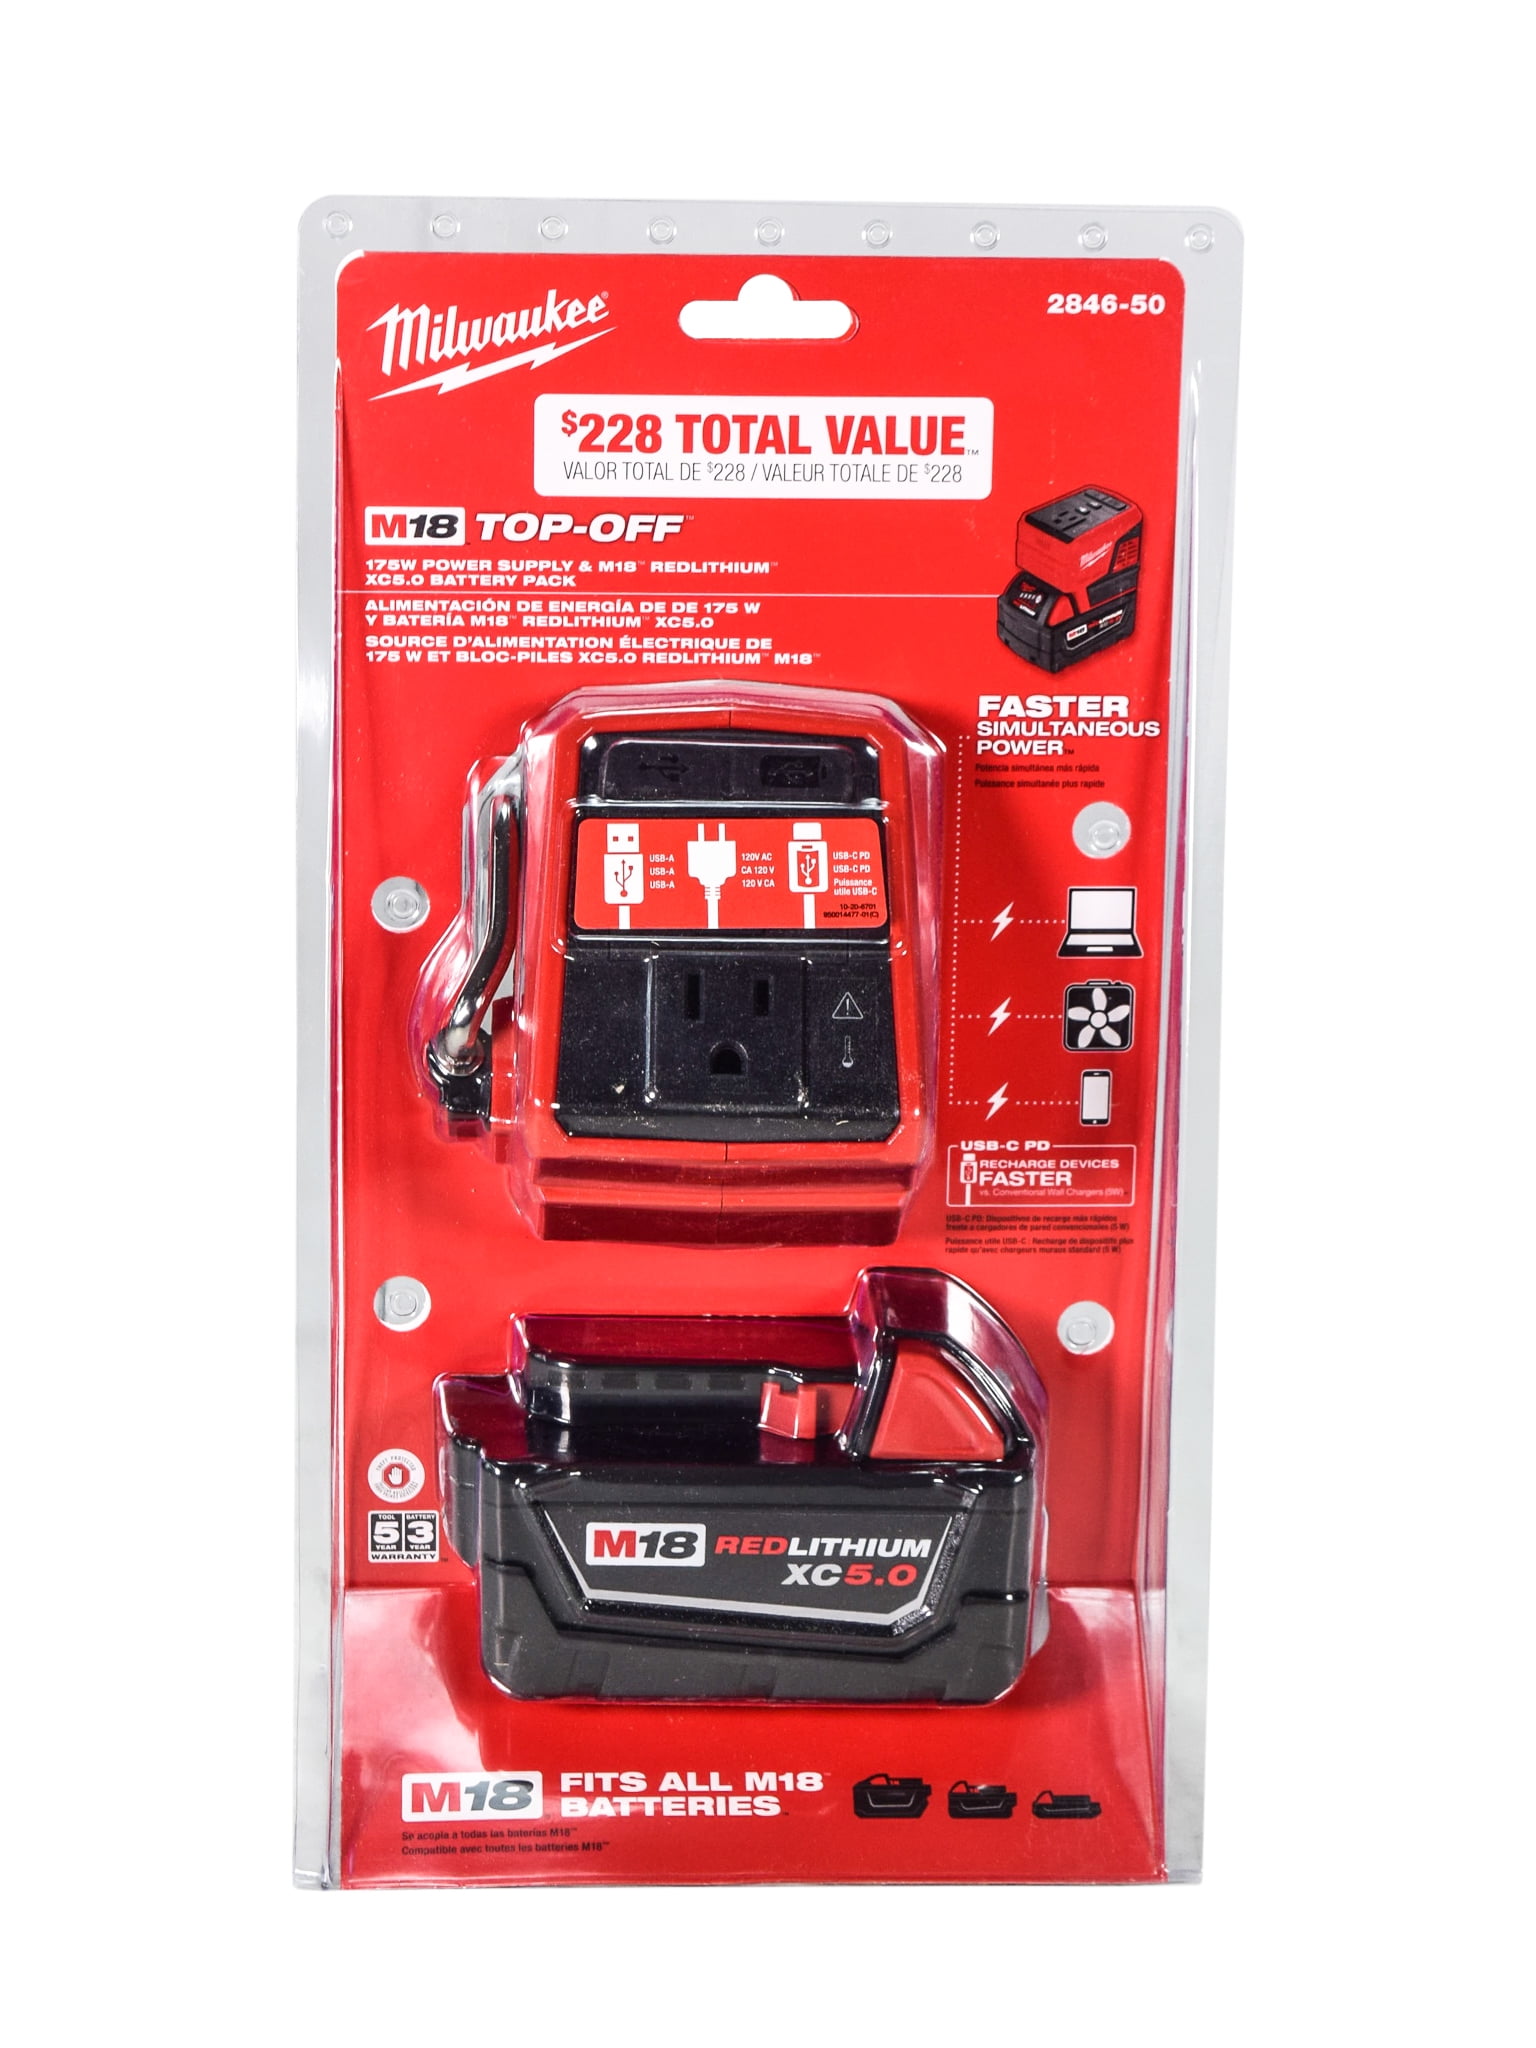 Milwaukee M18 TOP-OFF Kit XC5.0 18 V Ah Lithium-Ion 175W Power Supply  with Battery pc